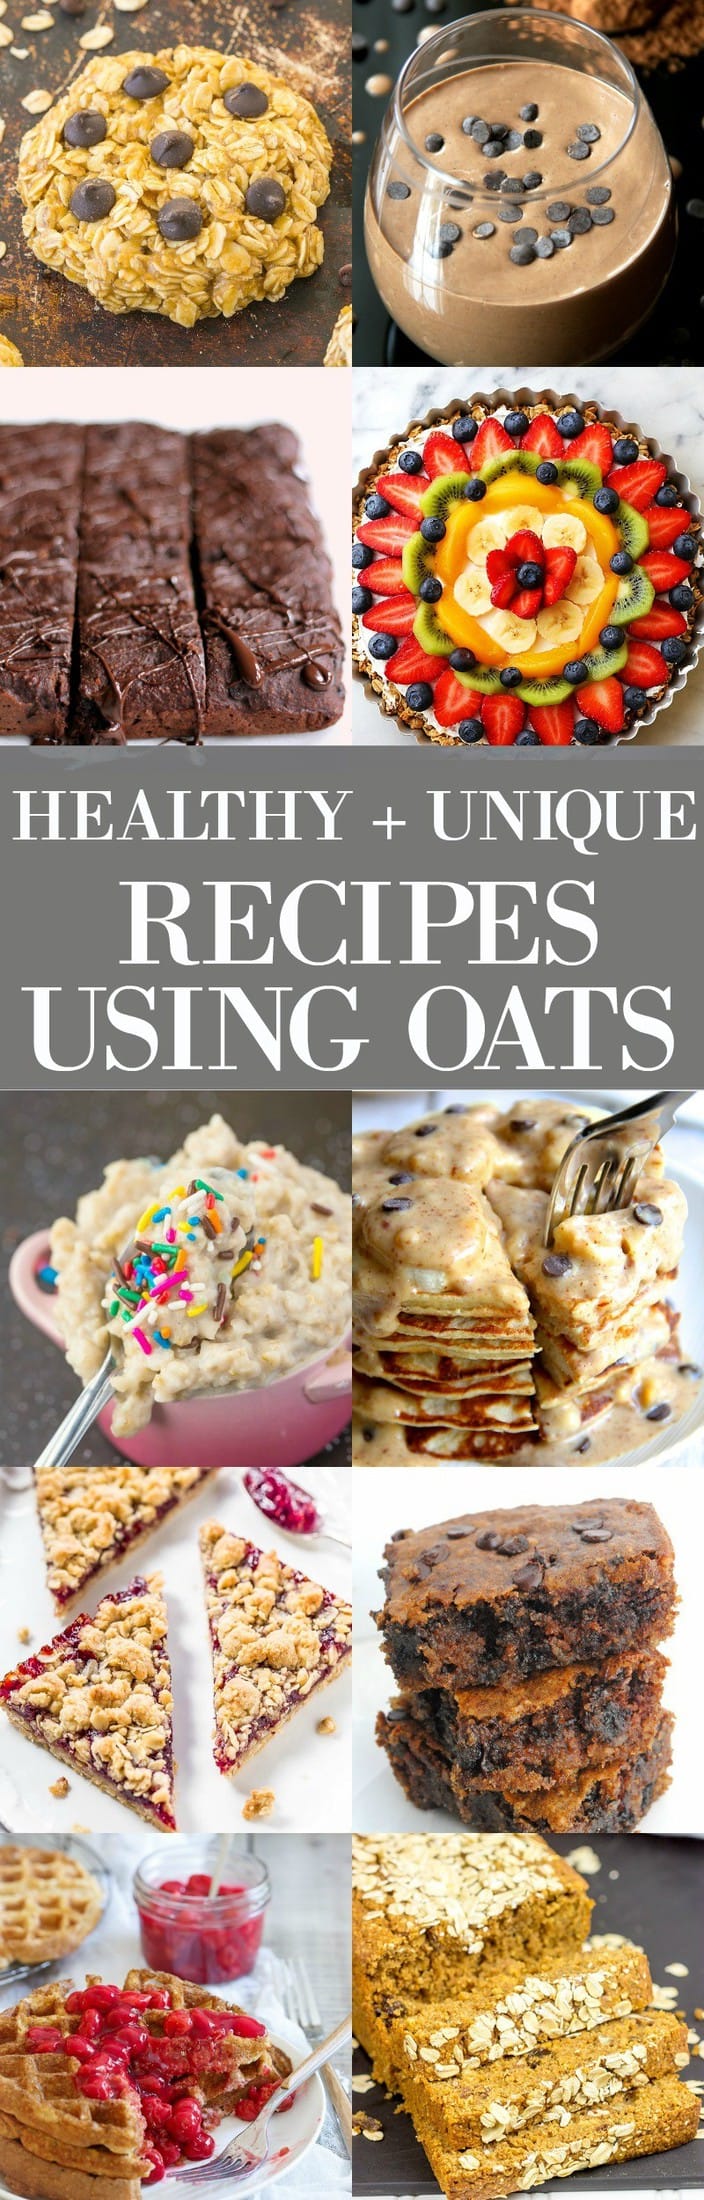 Healthy And Unique Recipes using oats- Mouthwatering recipes perfect for any occasion and ALL healthy! 